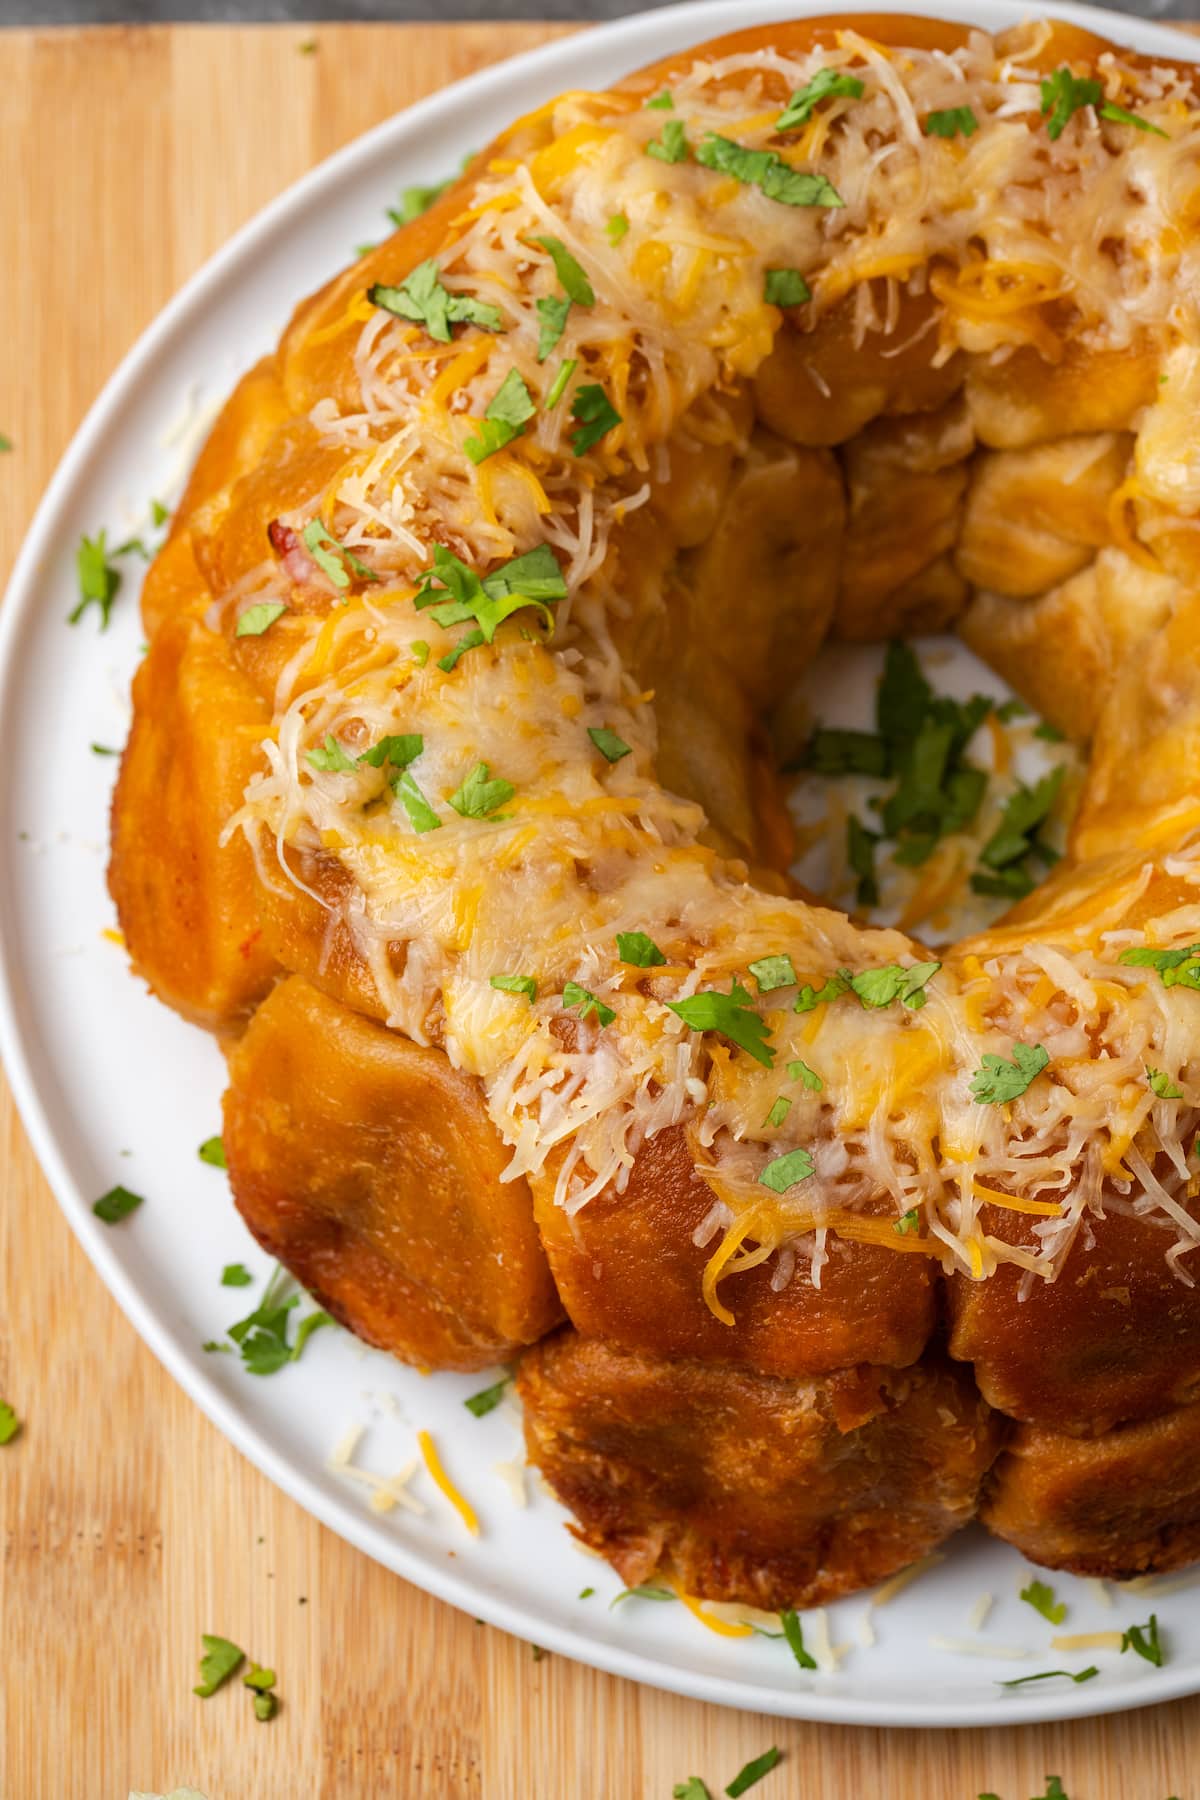 Taco monkey bread topped with melted cheese on a white plate.